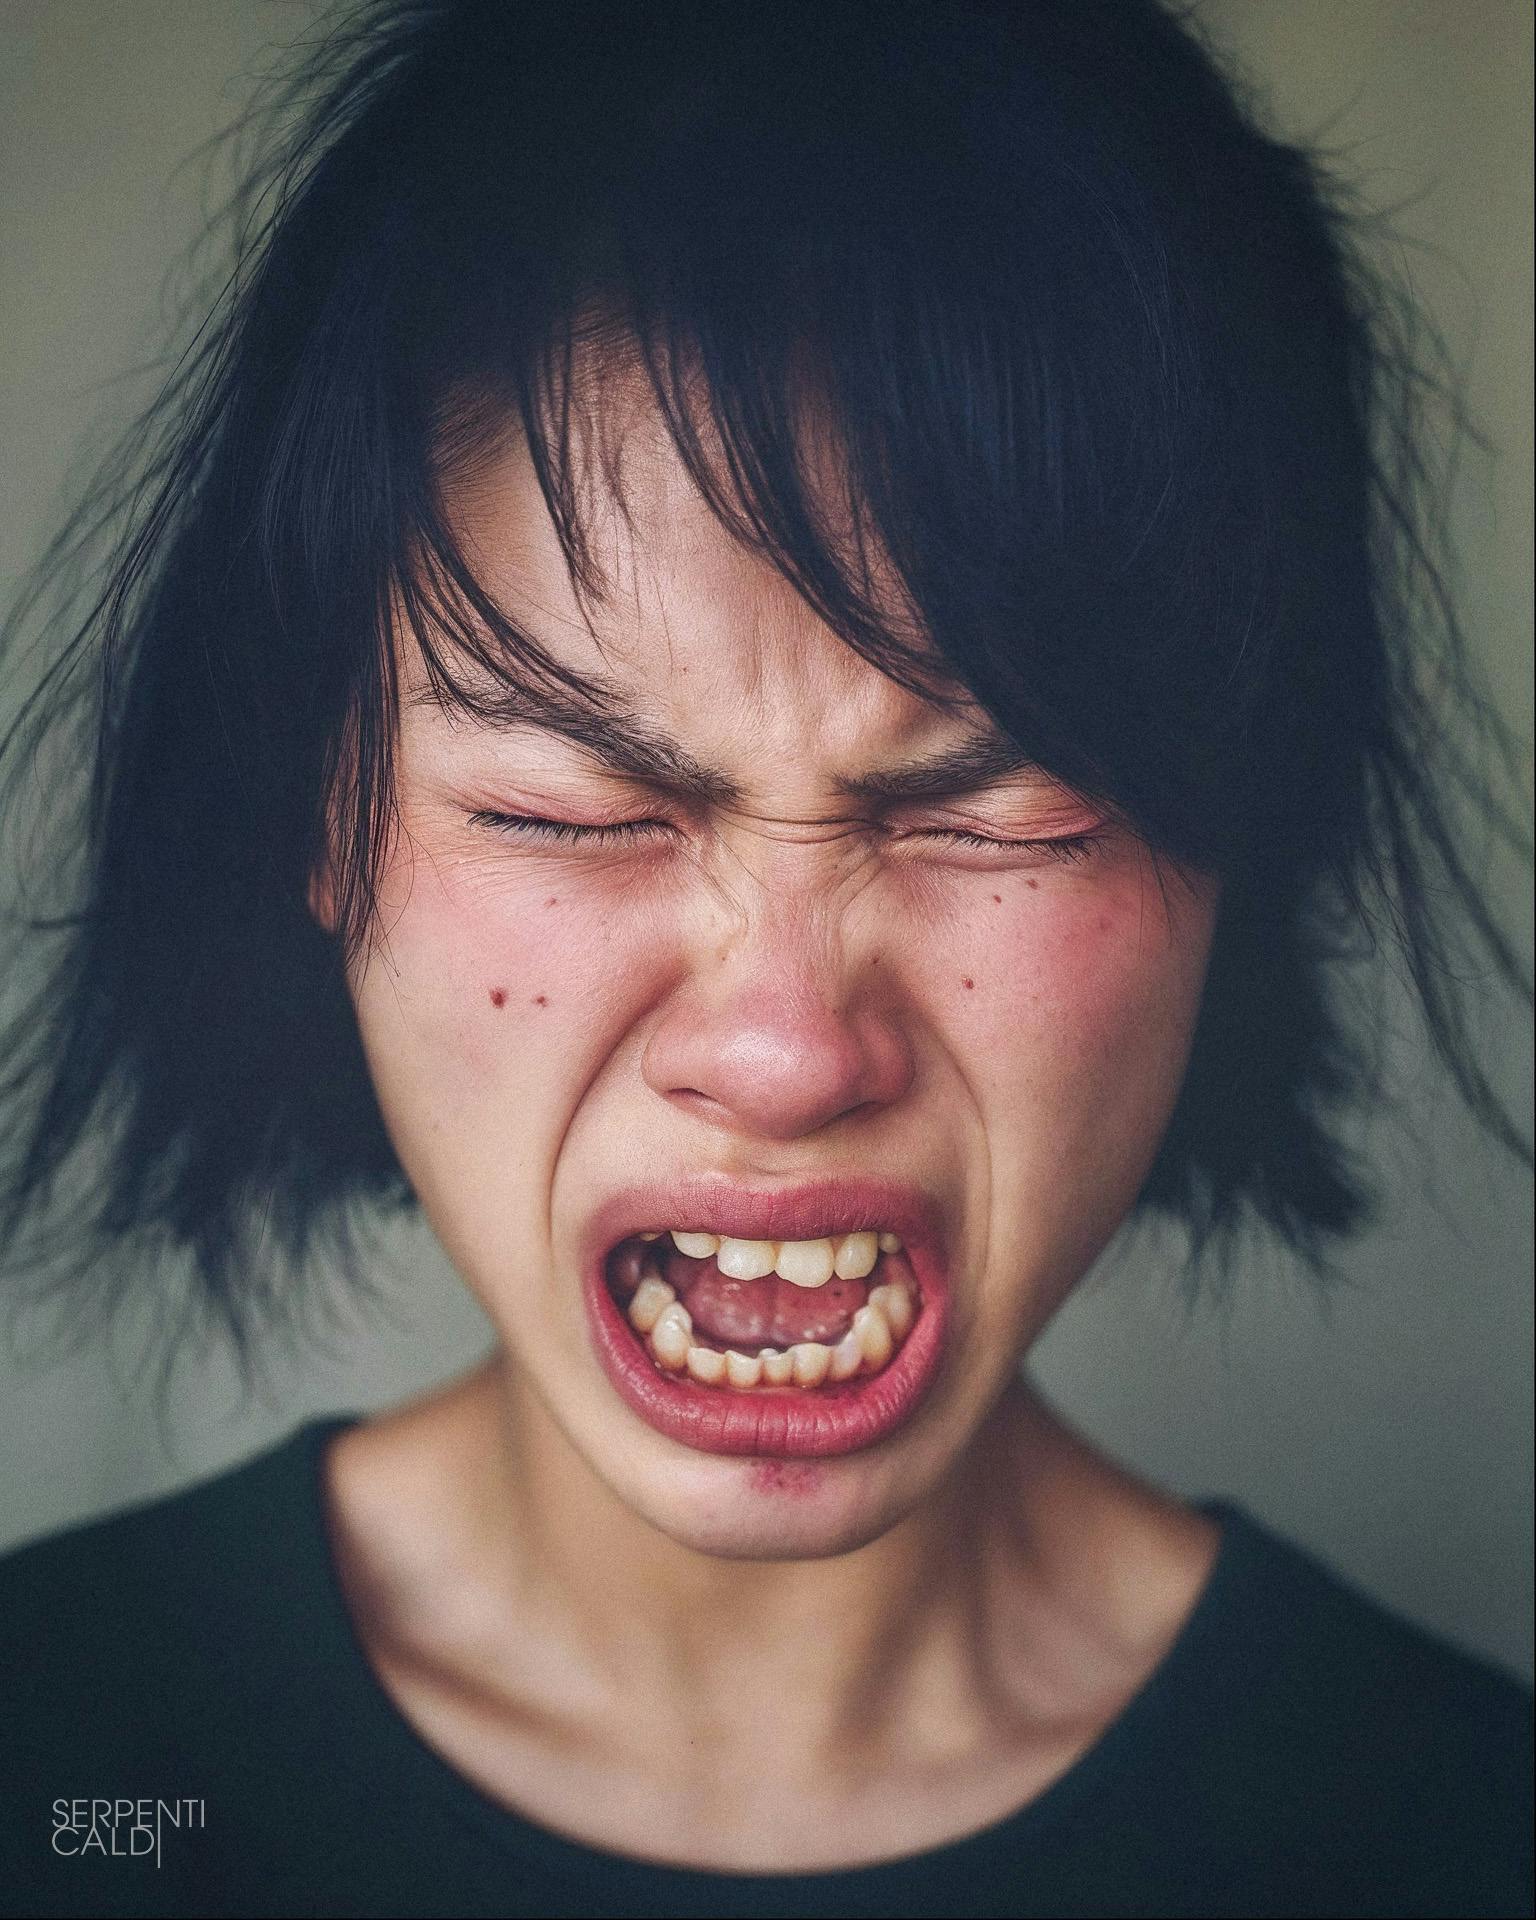 Photograph of a crying woman